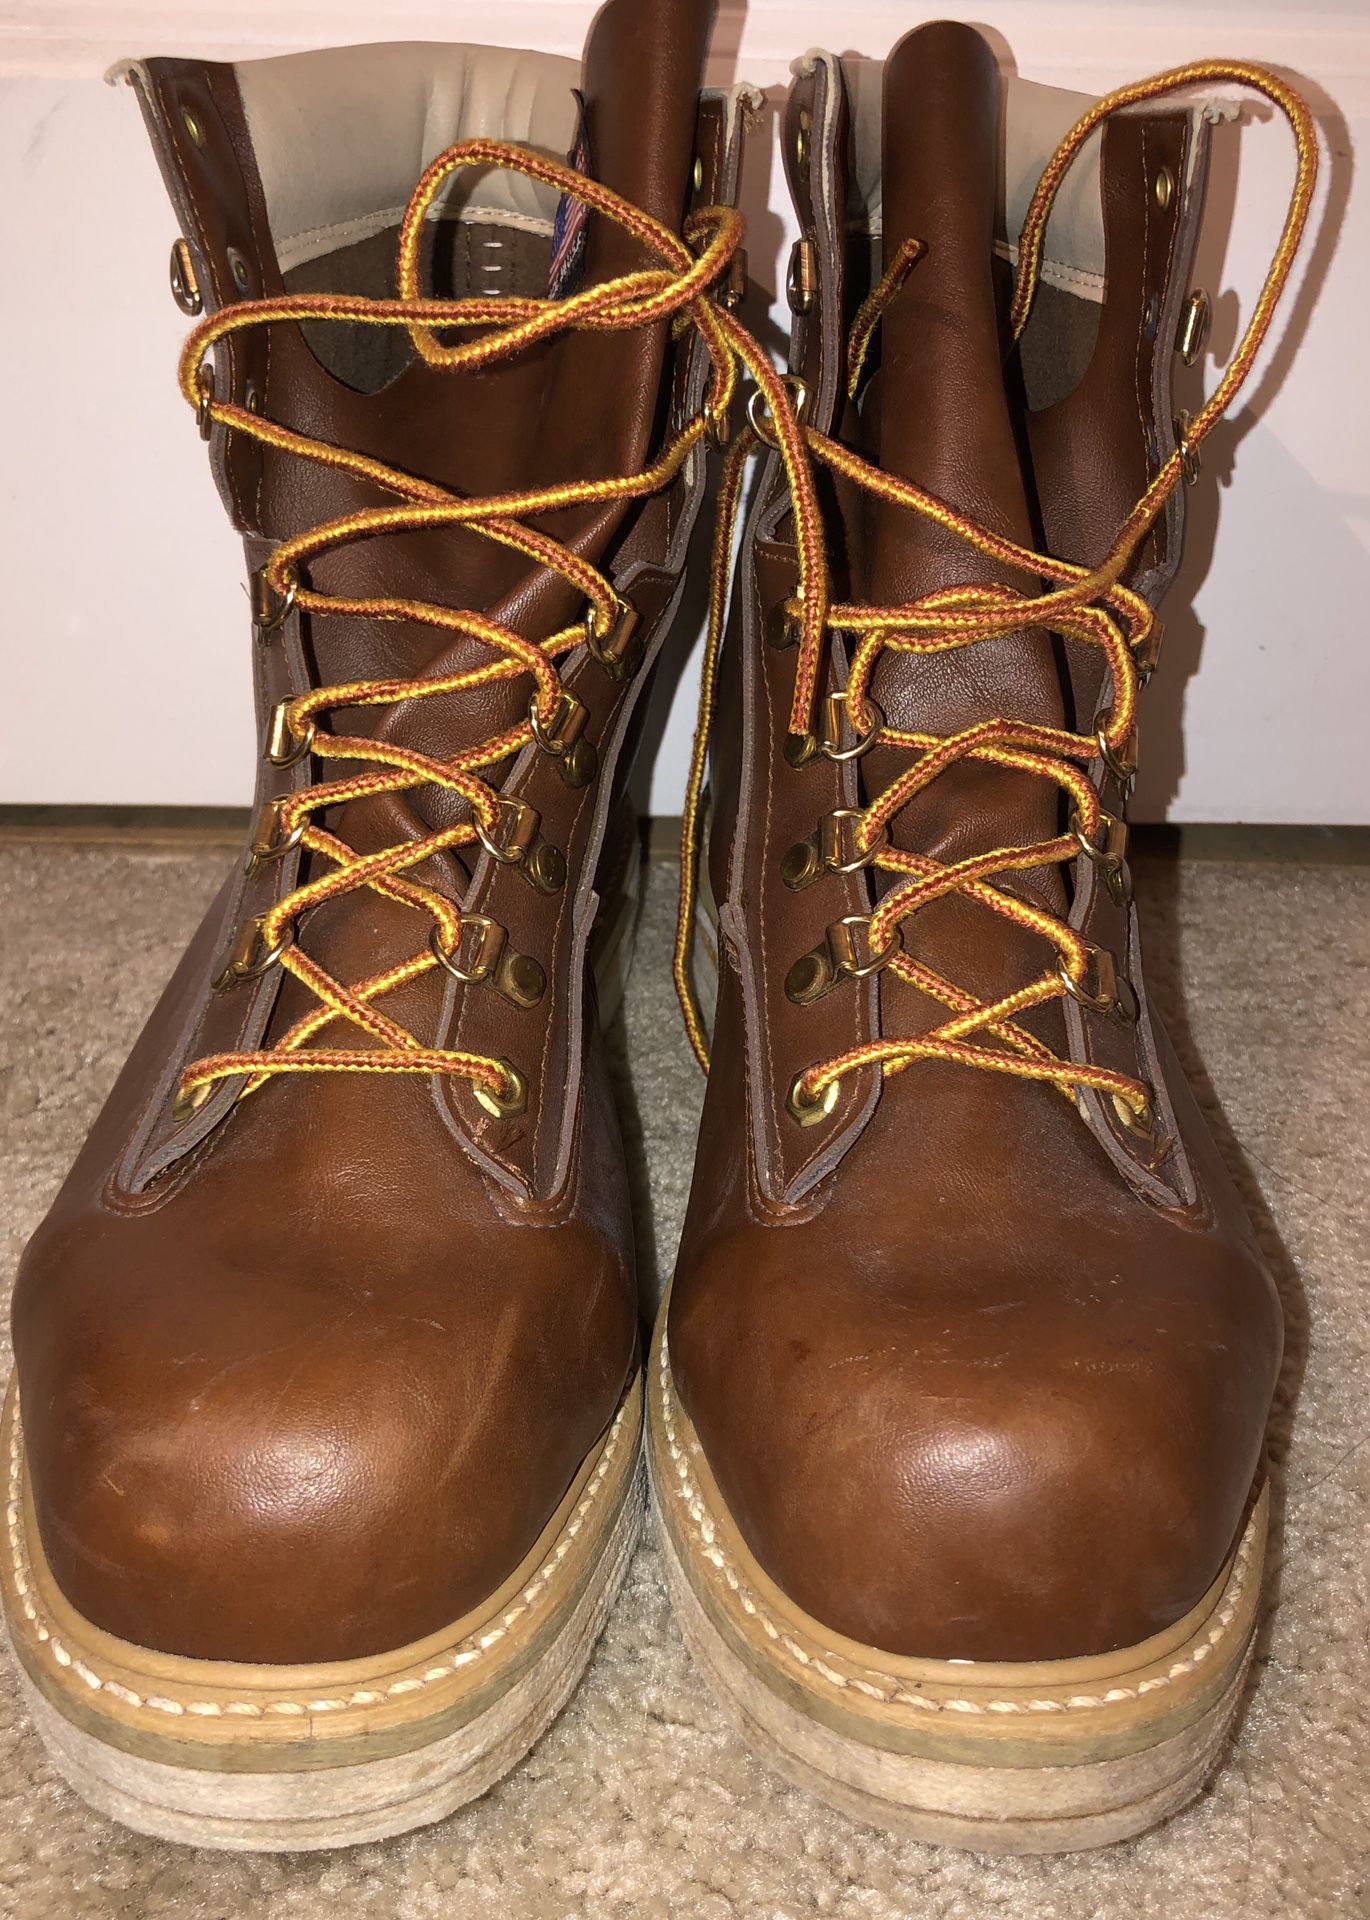 Simms wading boots men’s size 10 to 10-1/2